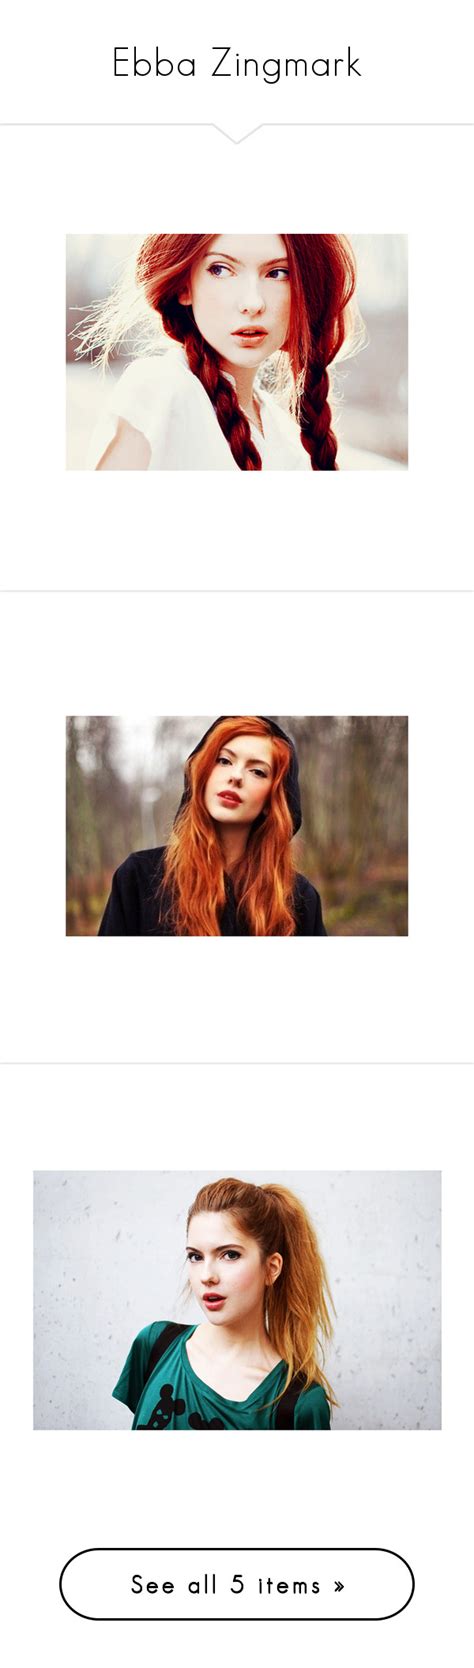 Ebba Zingmark By Sarahtur200217 Liked On Polyvore Featuring Ebba